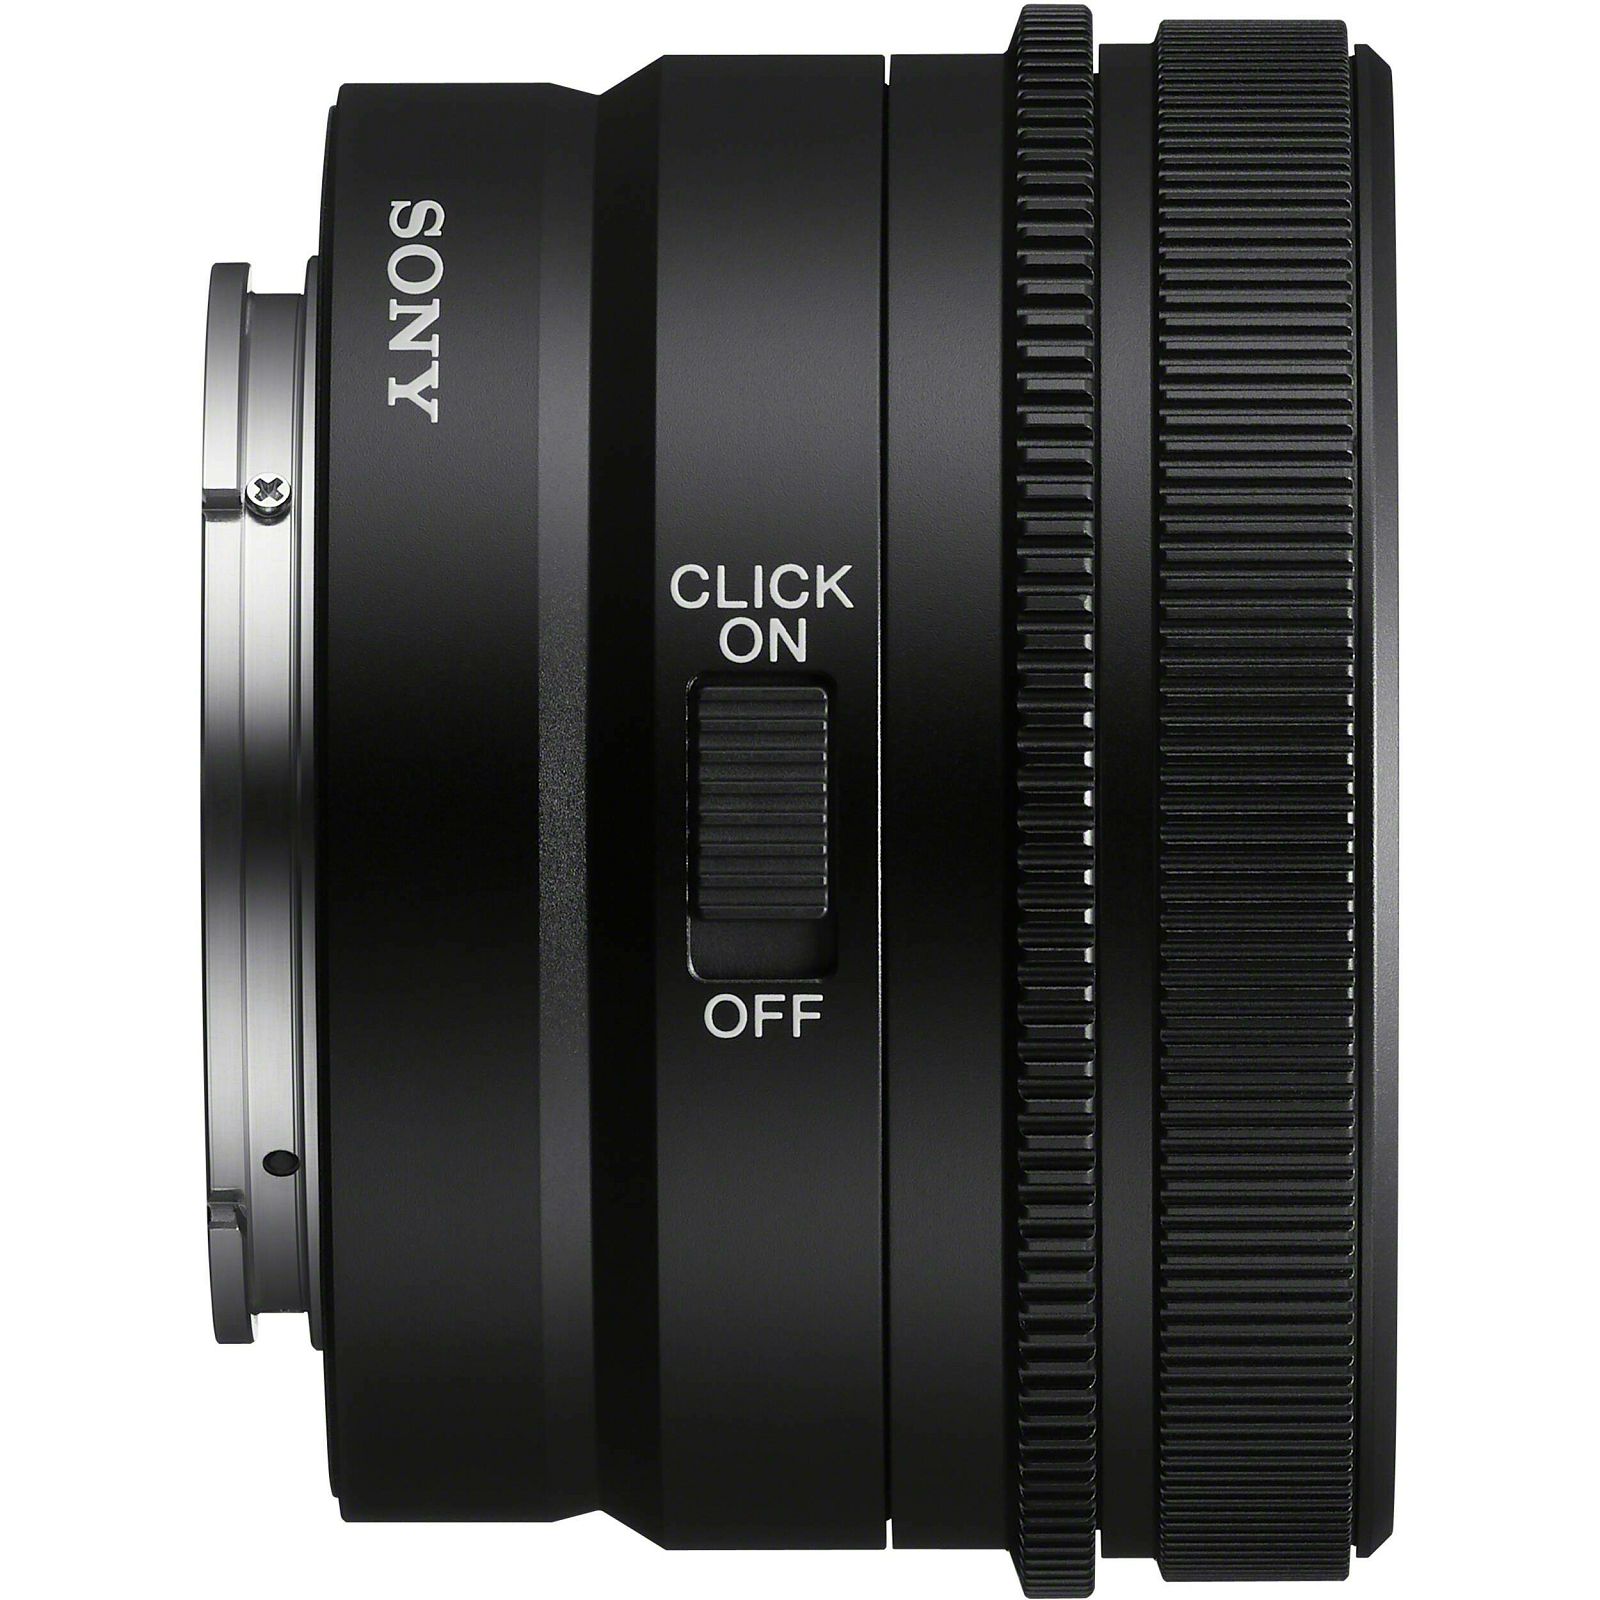 Sony FE 50mm f/2.5 G objektiv za E-Mount SEL-50F25G SEL50F25G (SEL50F25G.SYX) 